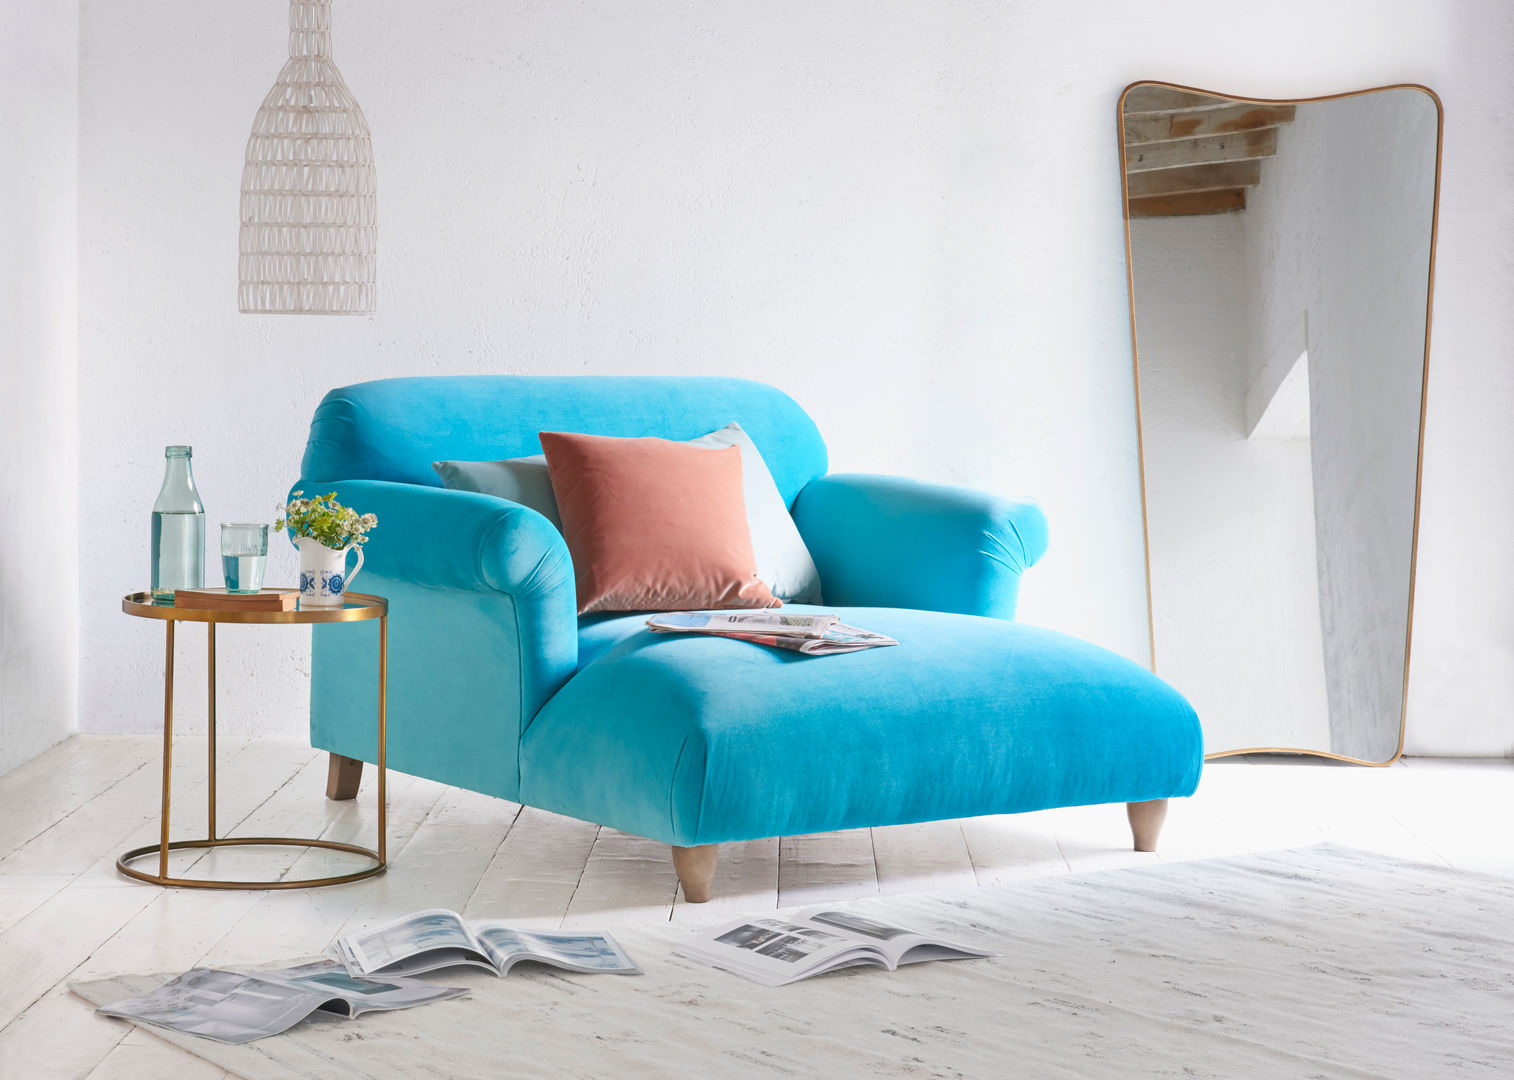 Soufflé love seat chaise Loaf Classic style living room sprung seat,love seat,chaise,bright blue,velvet,Sofas & armchairs